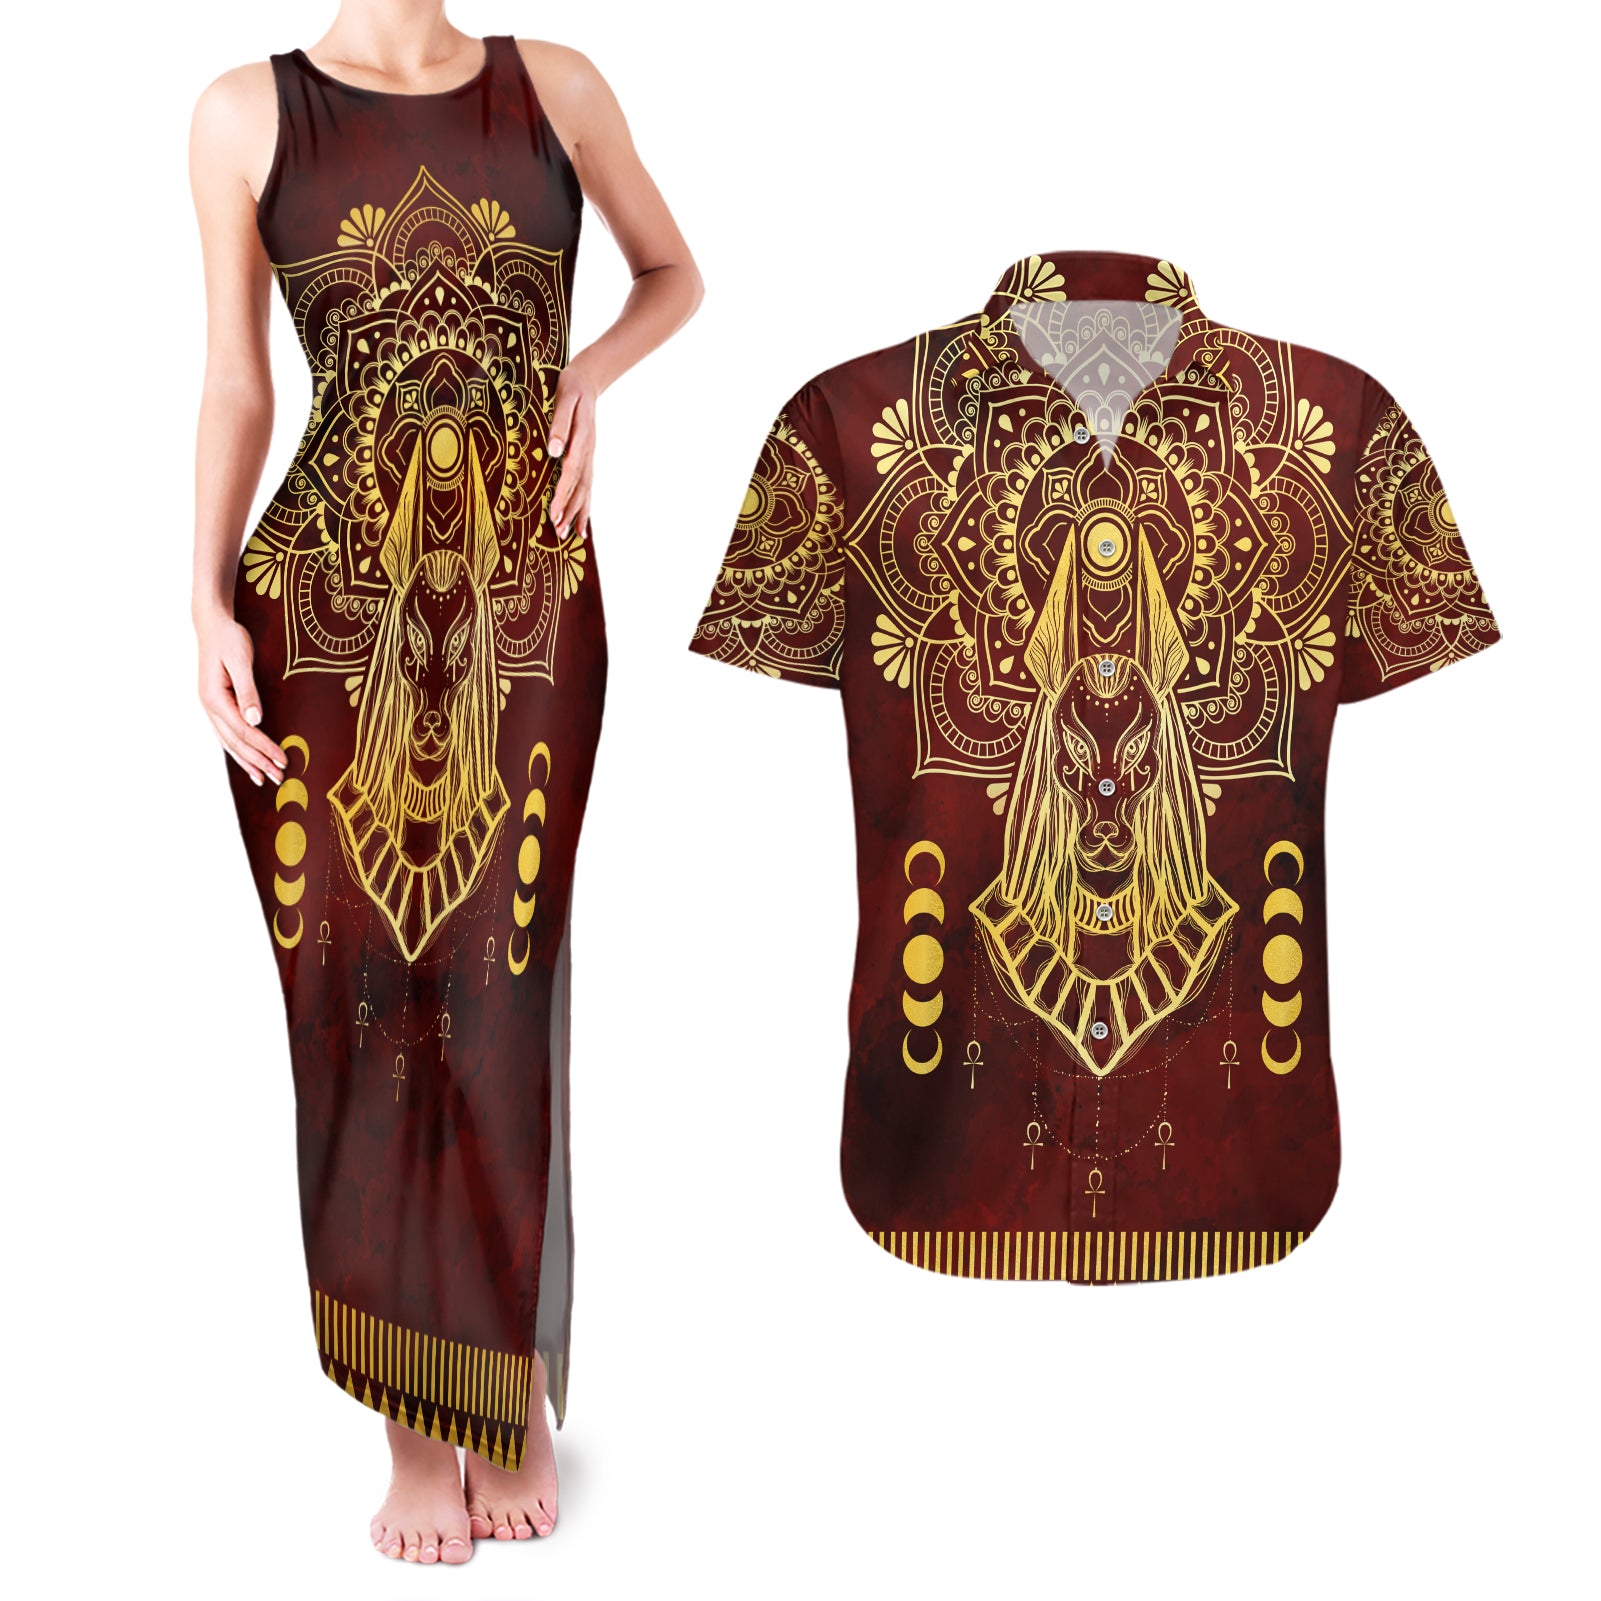 Personalized Anubis Couples Matching Tank Maxi Dress and Hawaiian Shirt Ancient Egyptian Pattern In Red